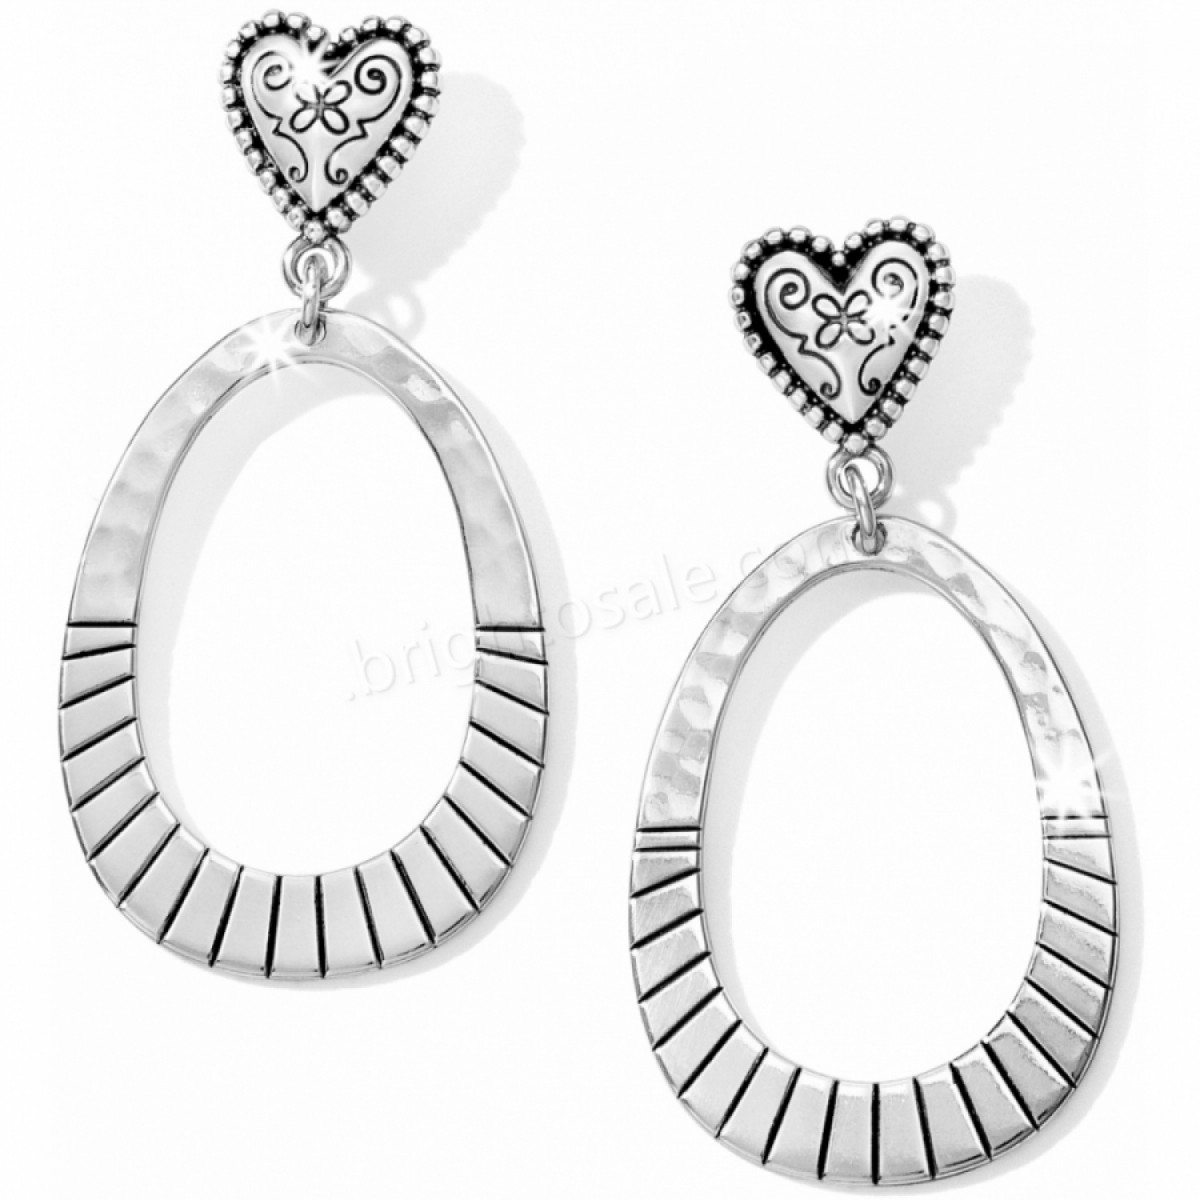 Brighton Collectibles & Online Discount All Your Love Post Drop Earrings - -0